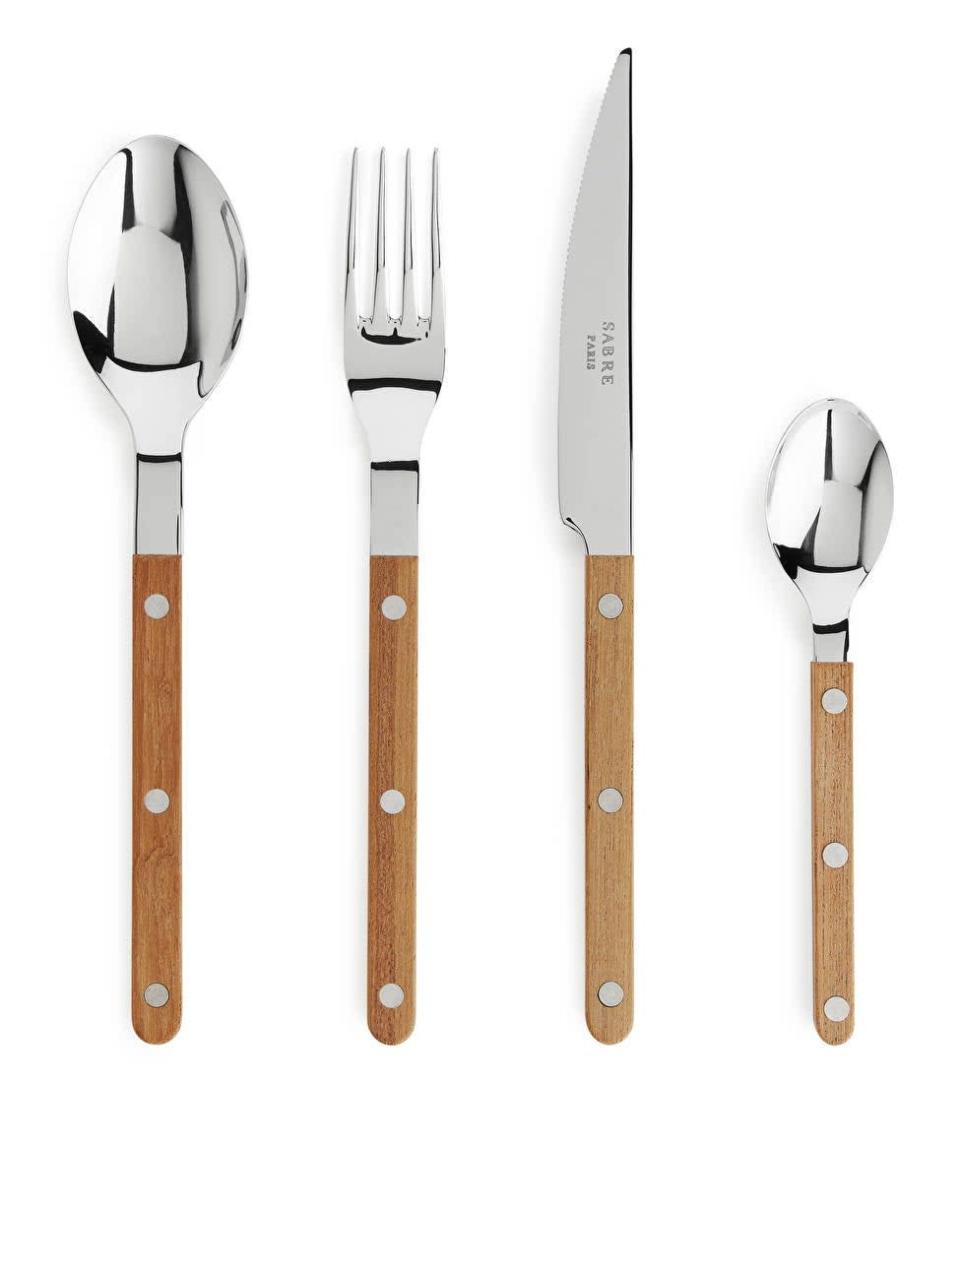 <strong>Under £150</strong><br><br>I’ve been ogling this cutlery set trying to add up how much I’d need to spend for a full set. Alas, it’s a lot.<br><br><strong>Arket</strong> Sabre Paris Teak Dinner Cutlery, $, available at <a href="https://www.arket.com/en_gbp/homeware/kitchen/product.sabre-paris-teak-dinner-cutlery-orange.0991287001.html" rel="nofollow noopener" target="_blank" data-ylk="slk:Arket" class="link rapid-noclick-resp">Arket</a>